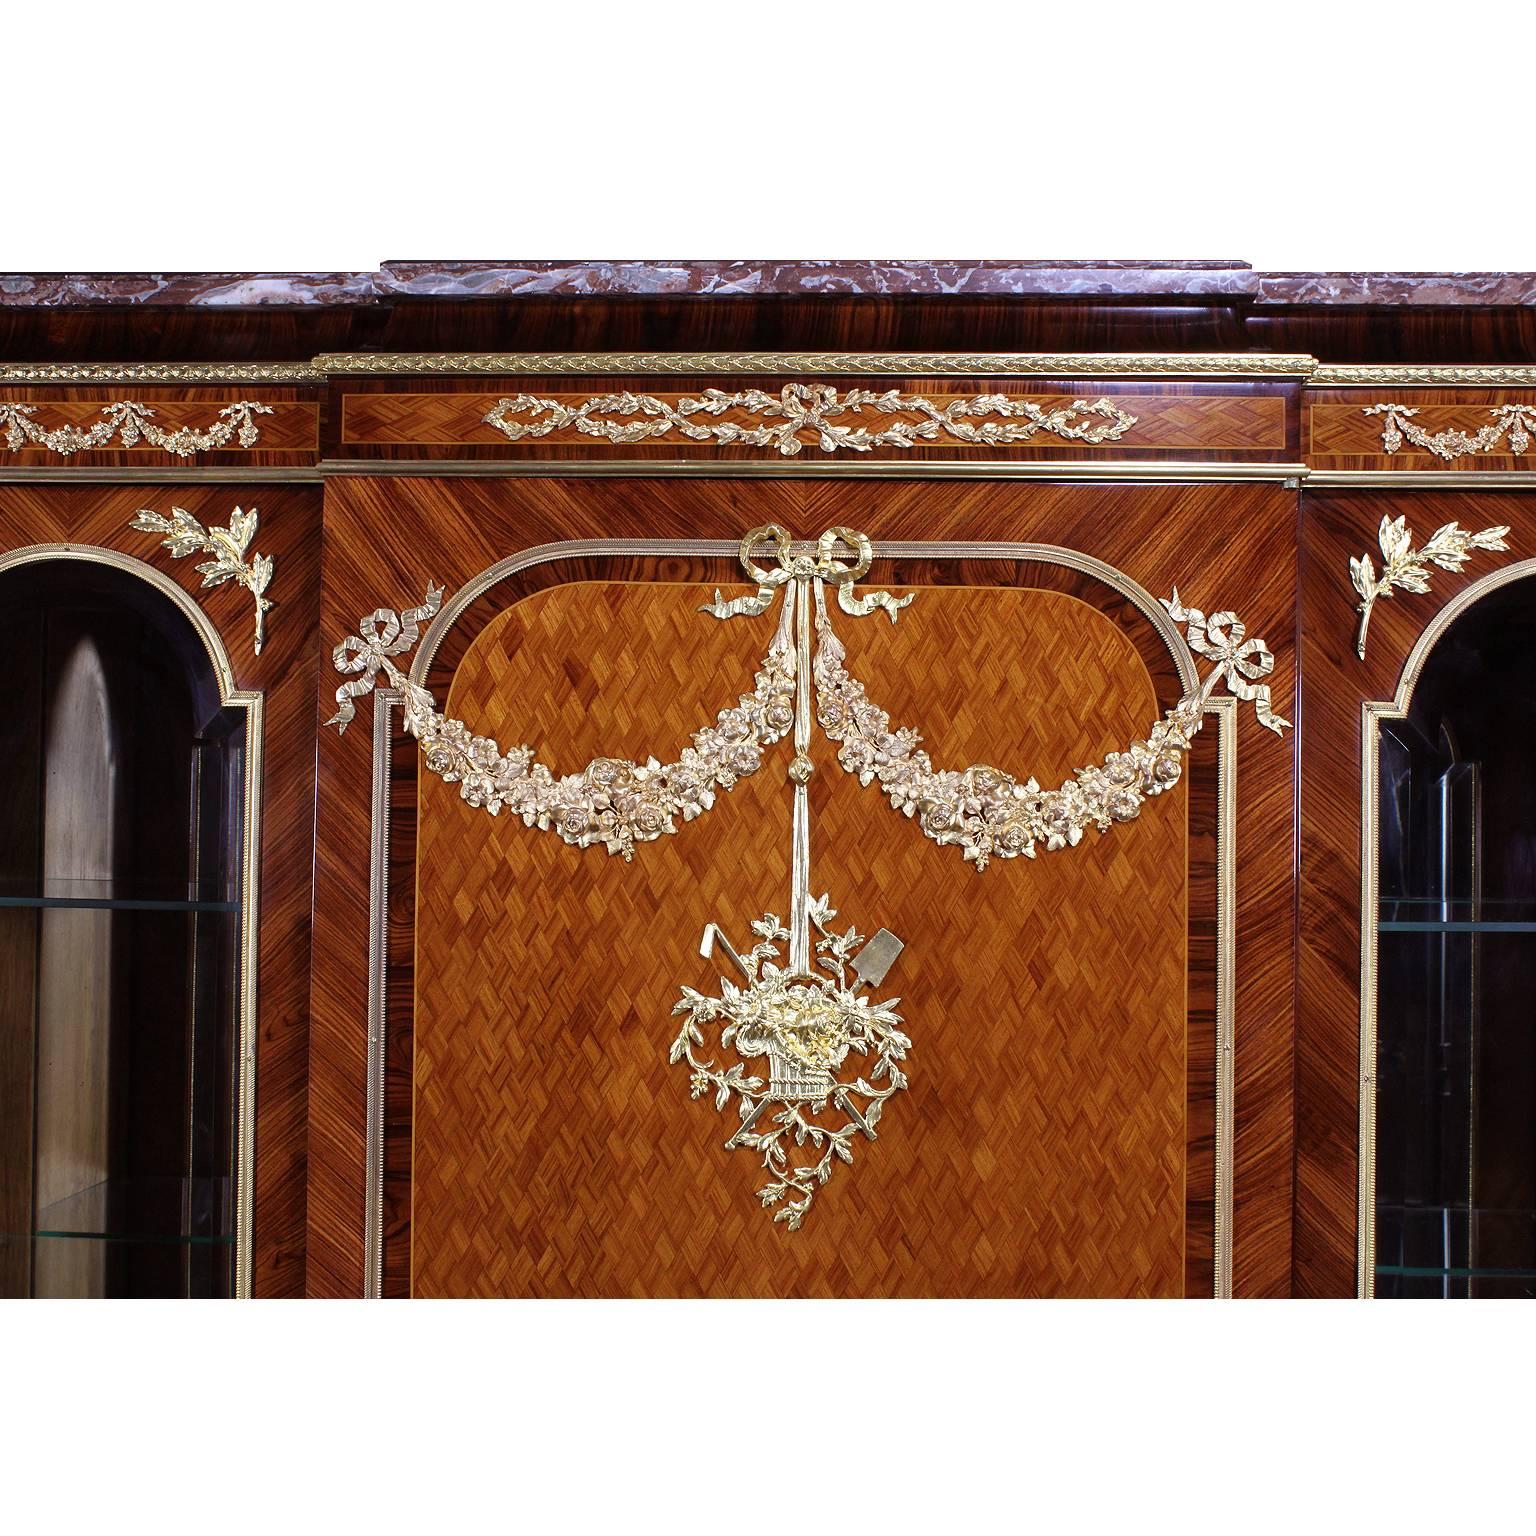 A very fine French 19th/20th century Louis XVI style mahogany, kingwood and tulipwood parquetry three-door vitrine with ormolu-mounted floral wreaths, ribbons, female masks and centred with an ormolu basket with flowers amongst foliage. The central